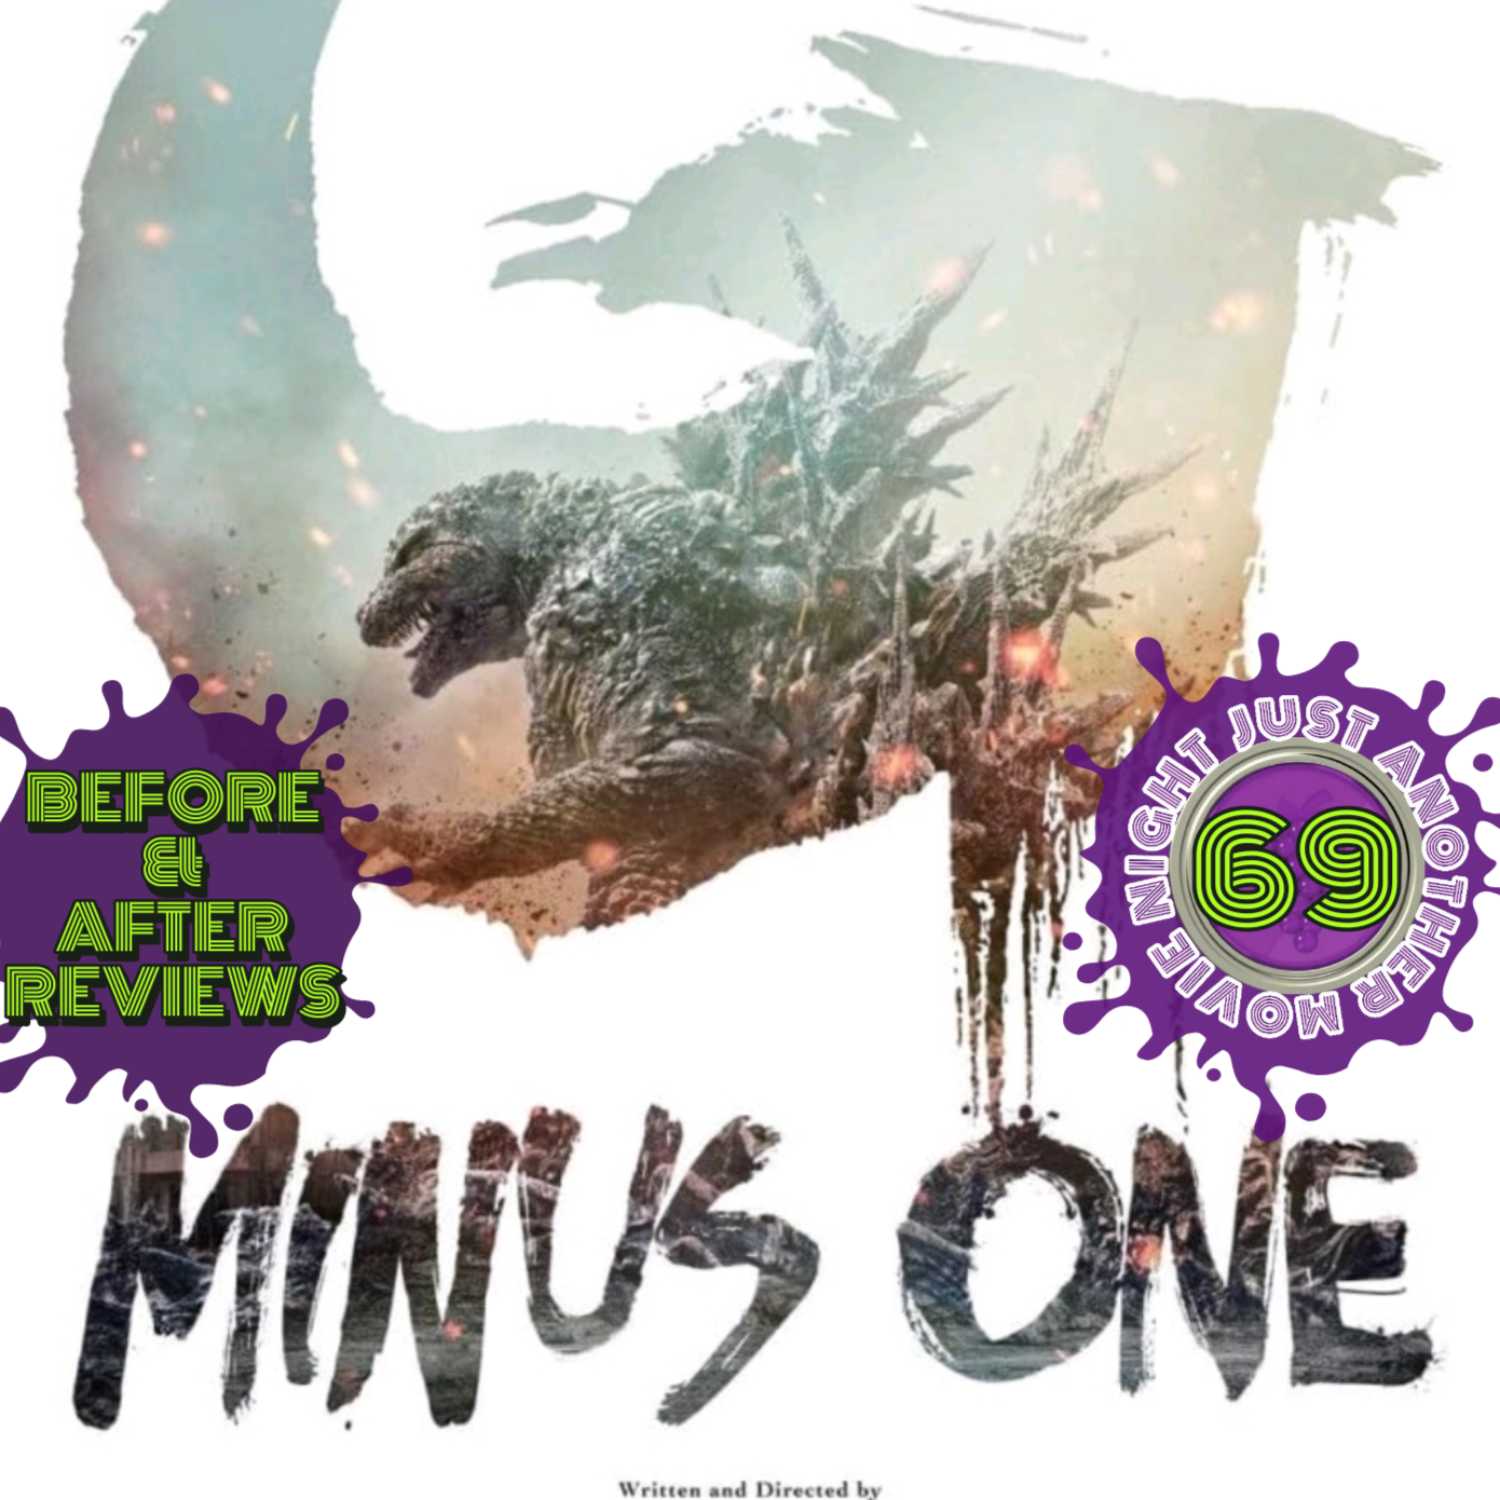 Before and After reviews Episode 69: Godzilla minus one